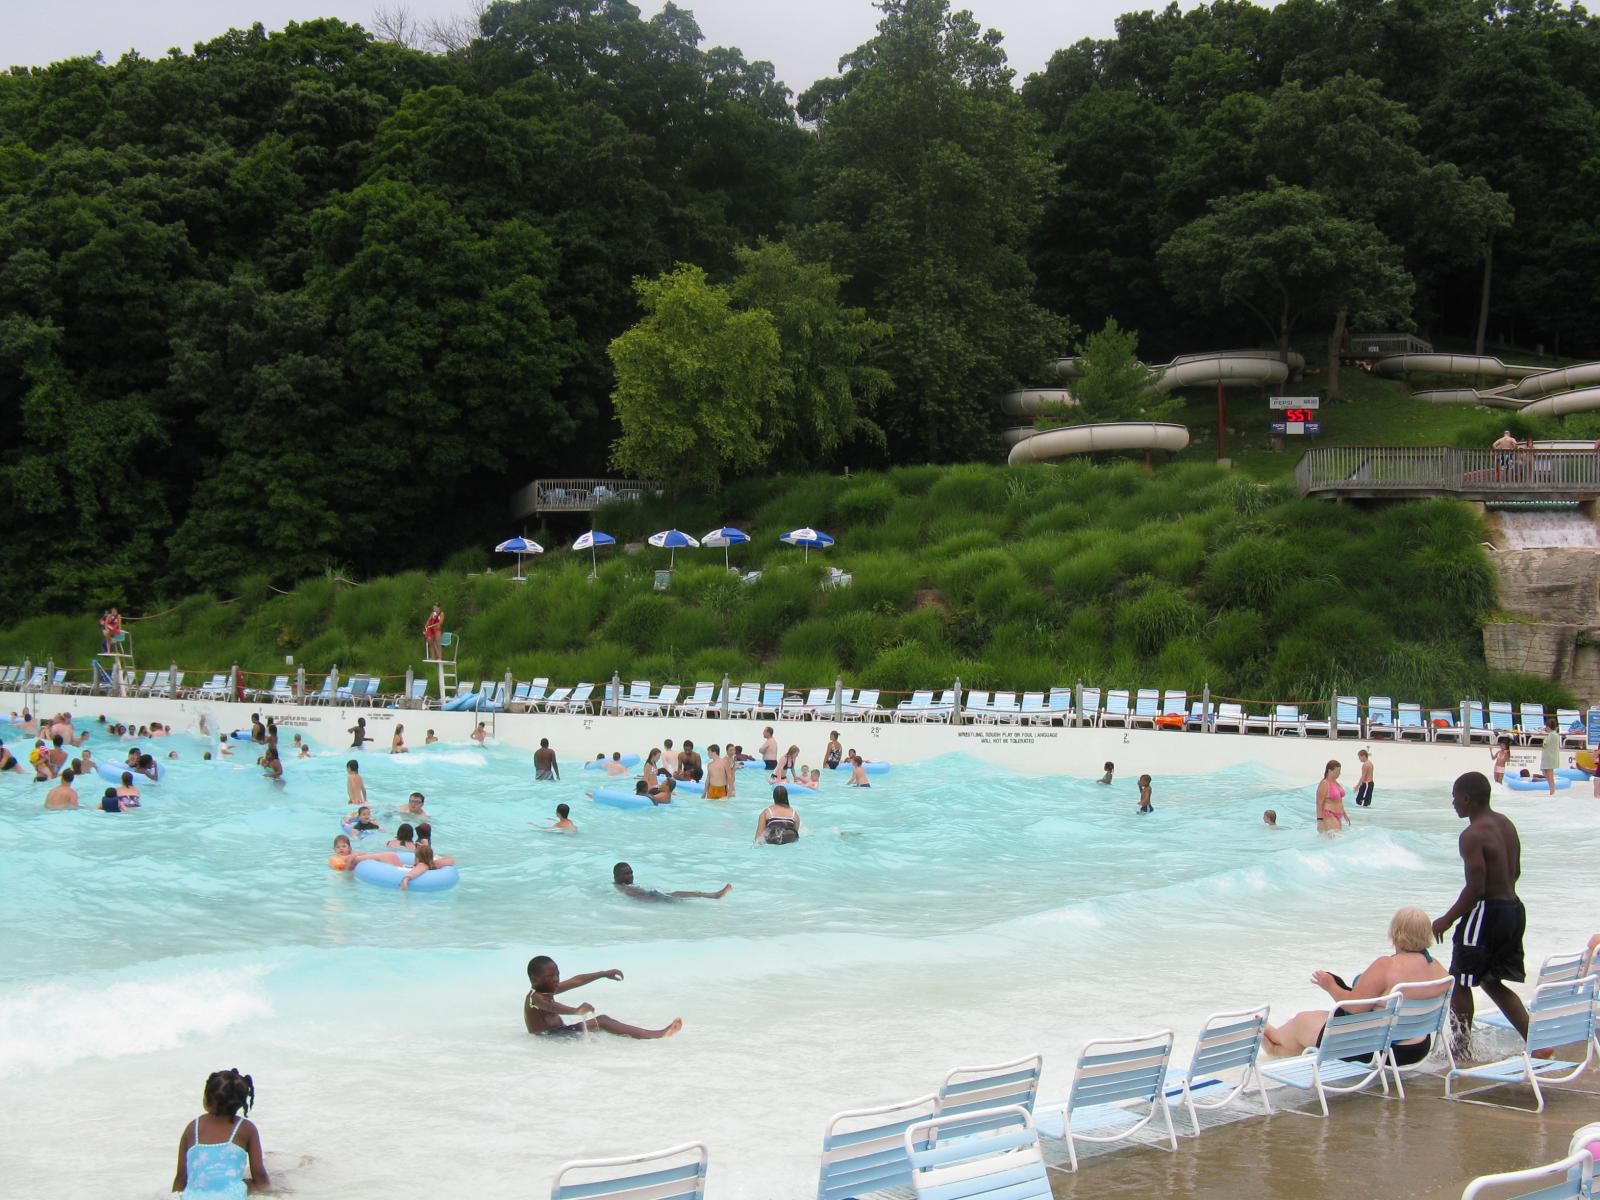 Public Swimming Pools and Water Parks in St. Louis